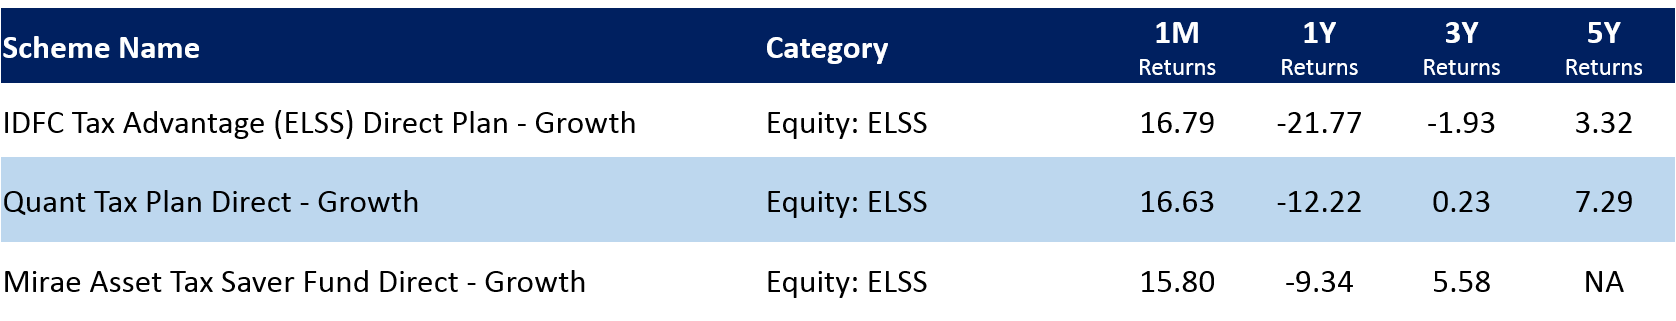 ELSS funds in April 2020